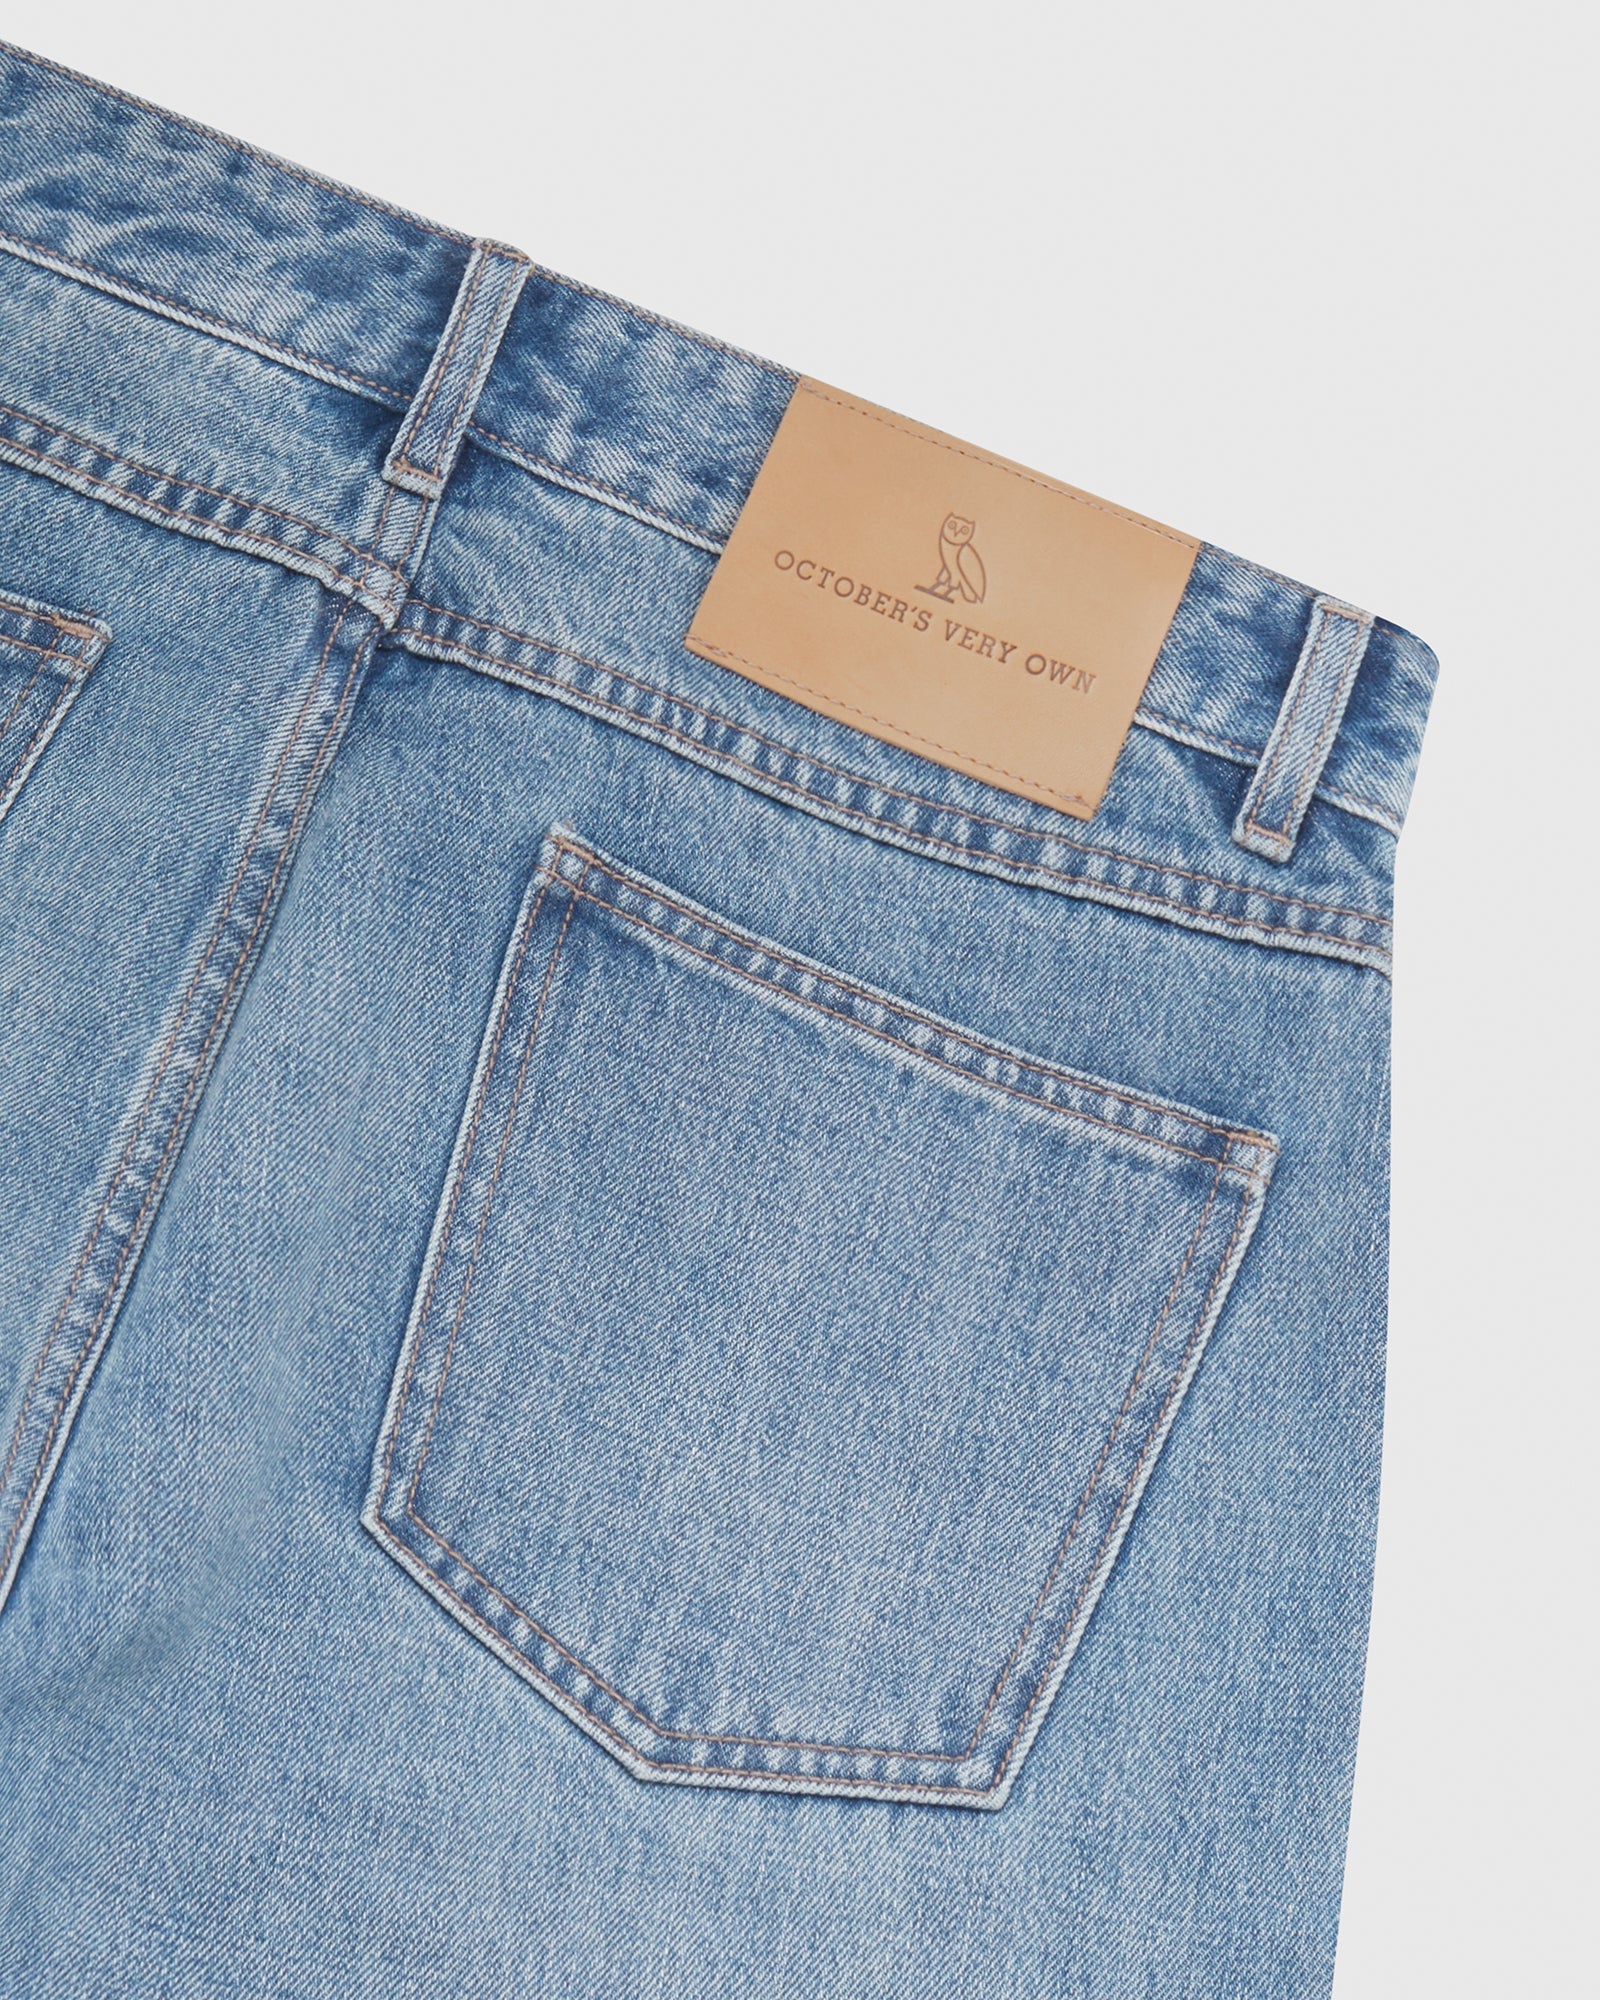 5 Pocket Relaxed Fit Jean - Washed Indigo